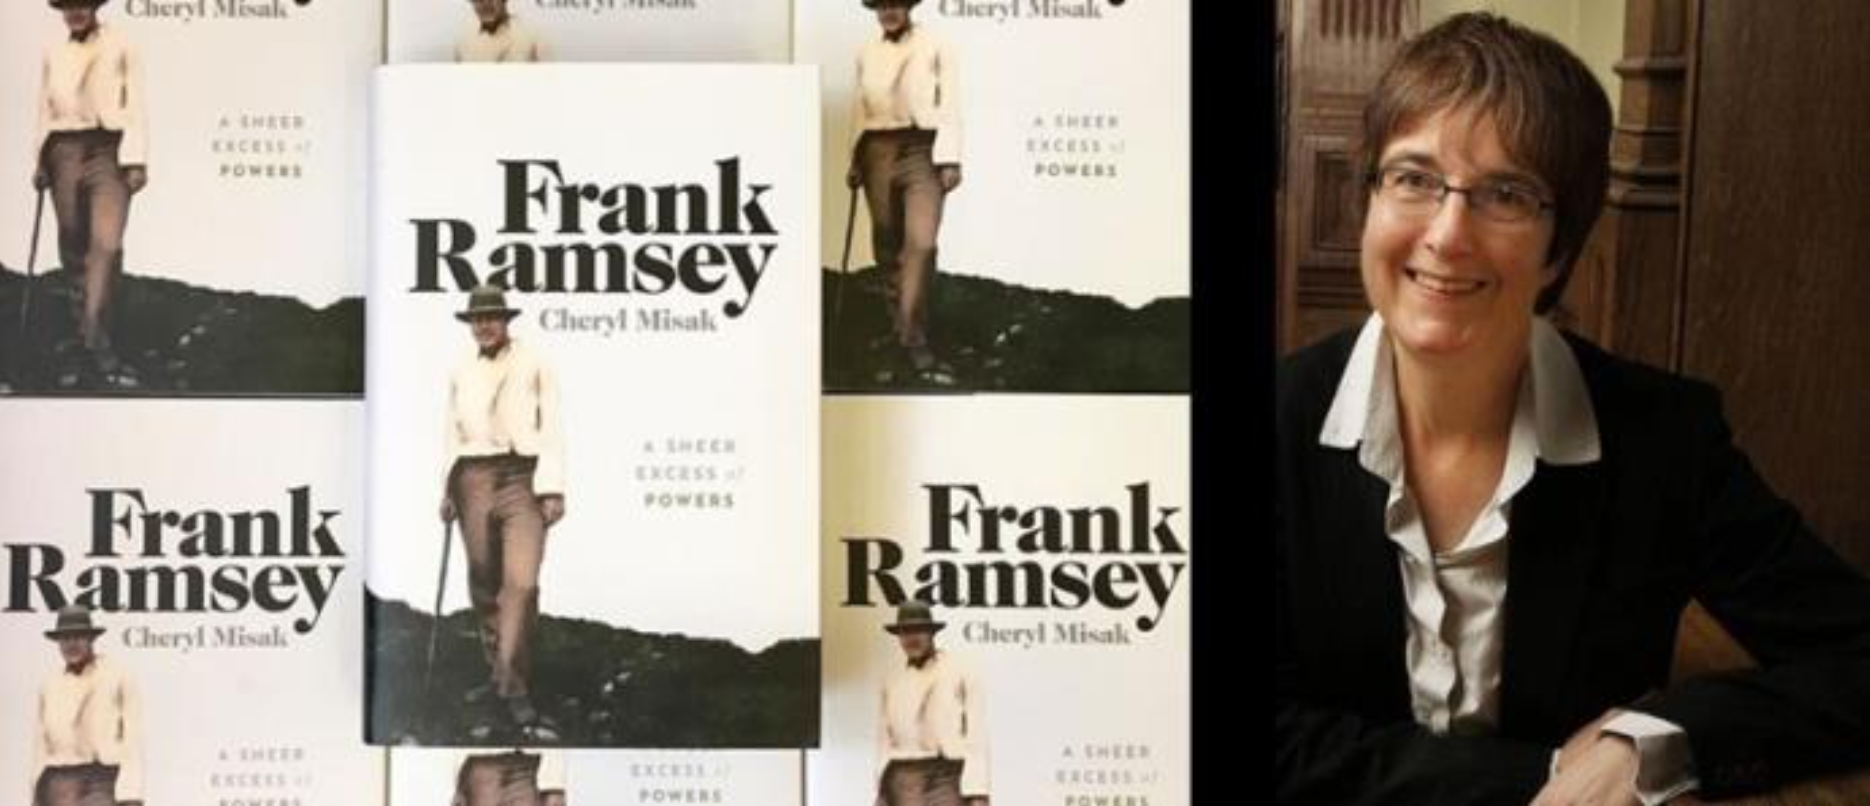 Book Review of Frank Ramsey: A Sheer Excess of Powers